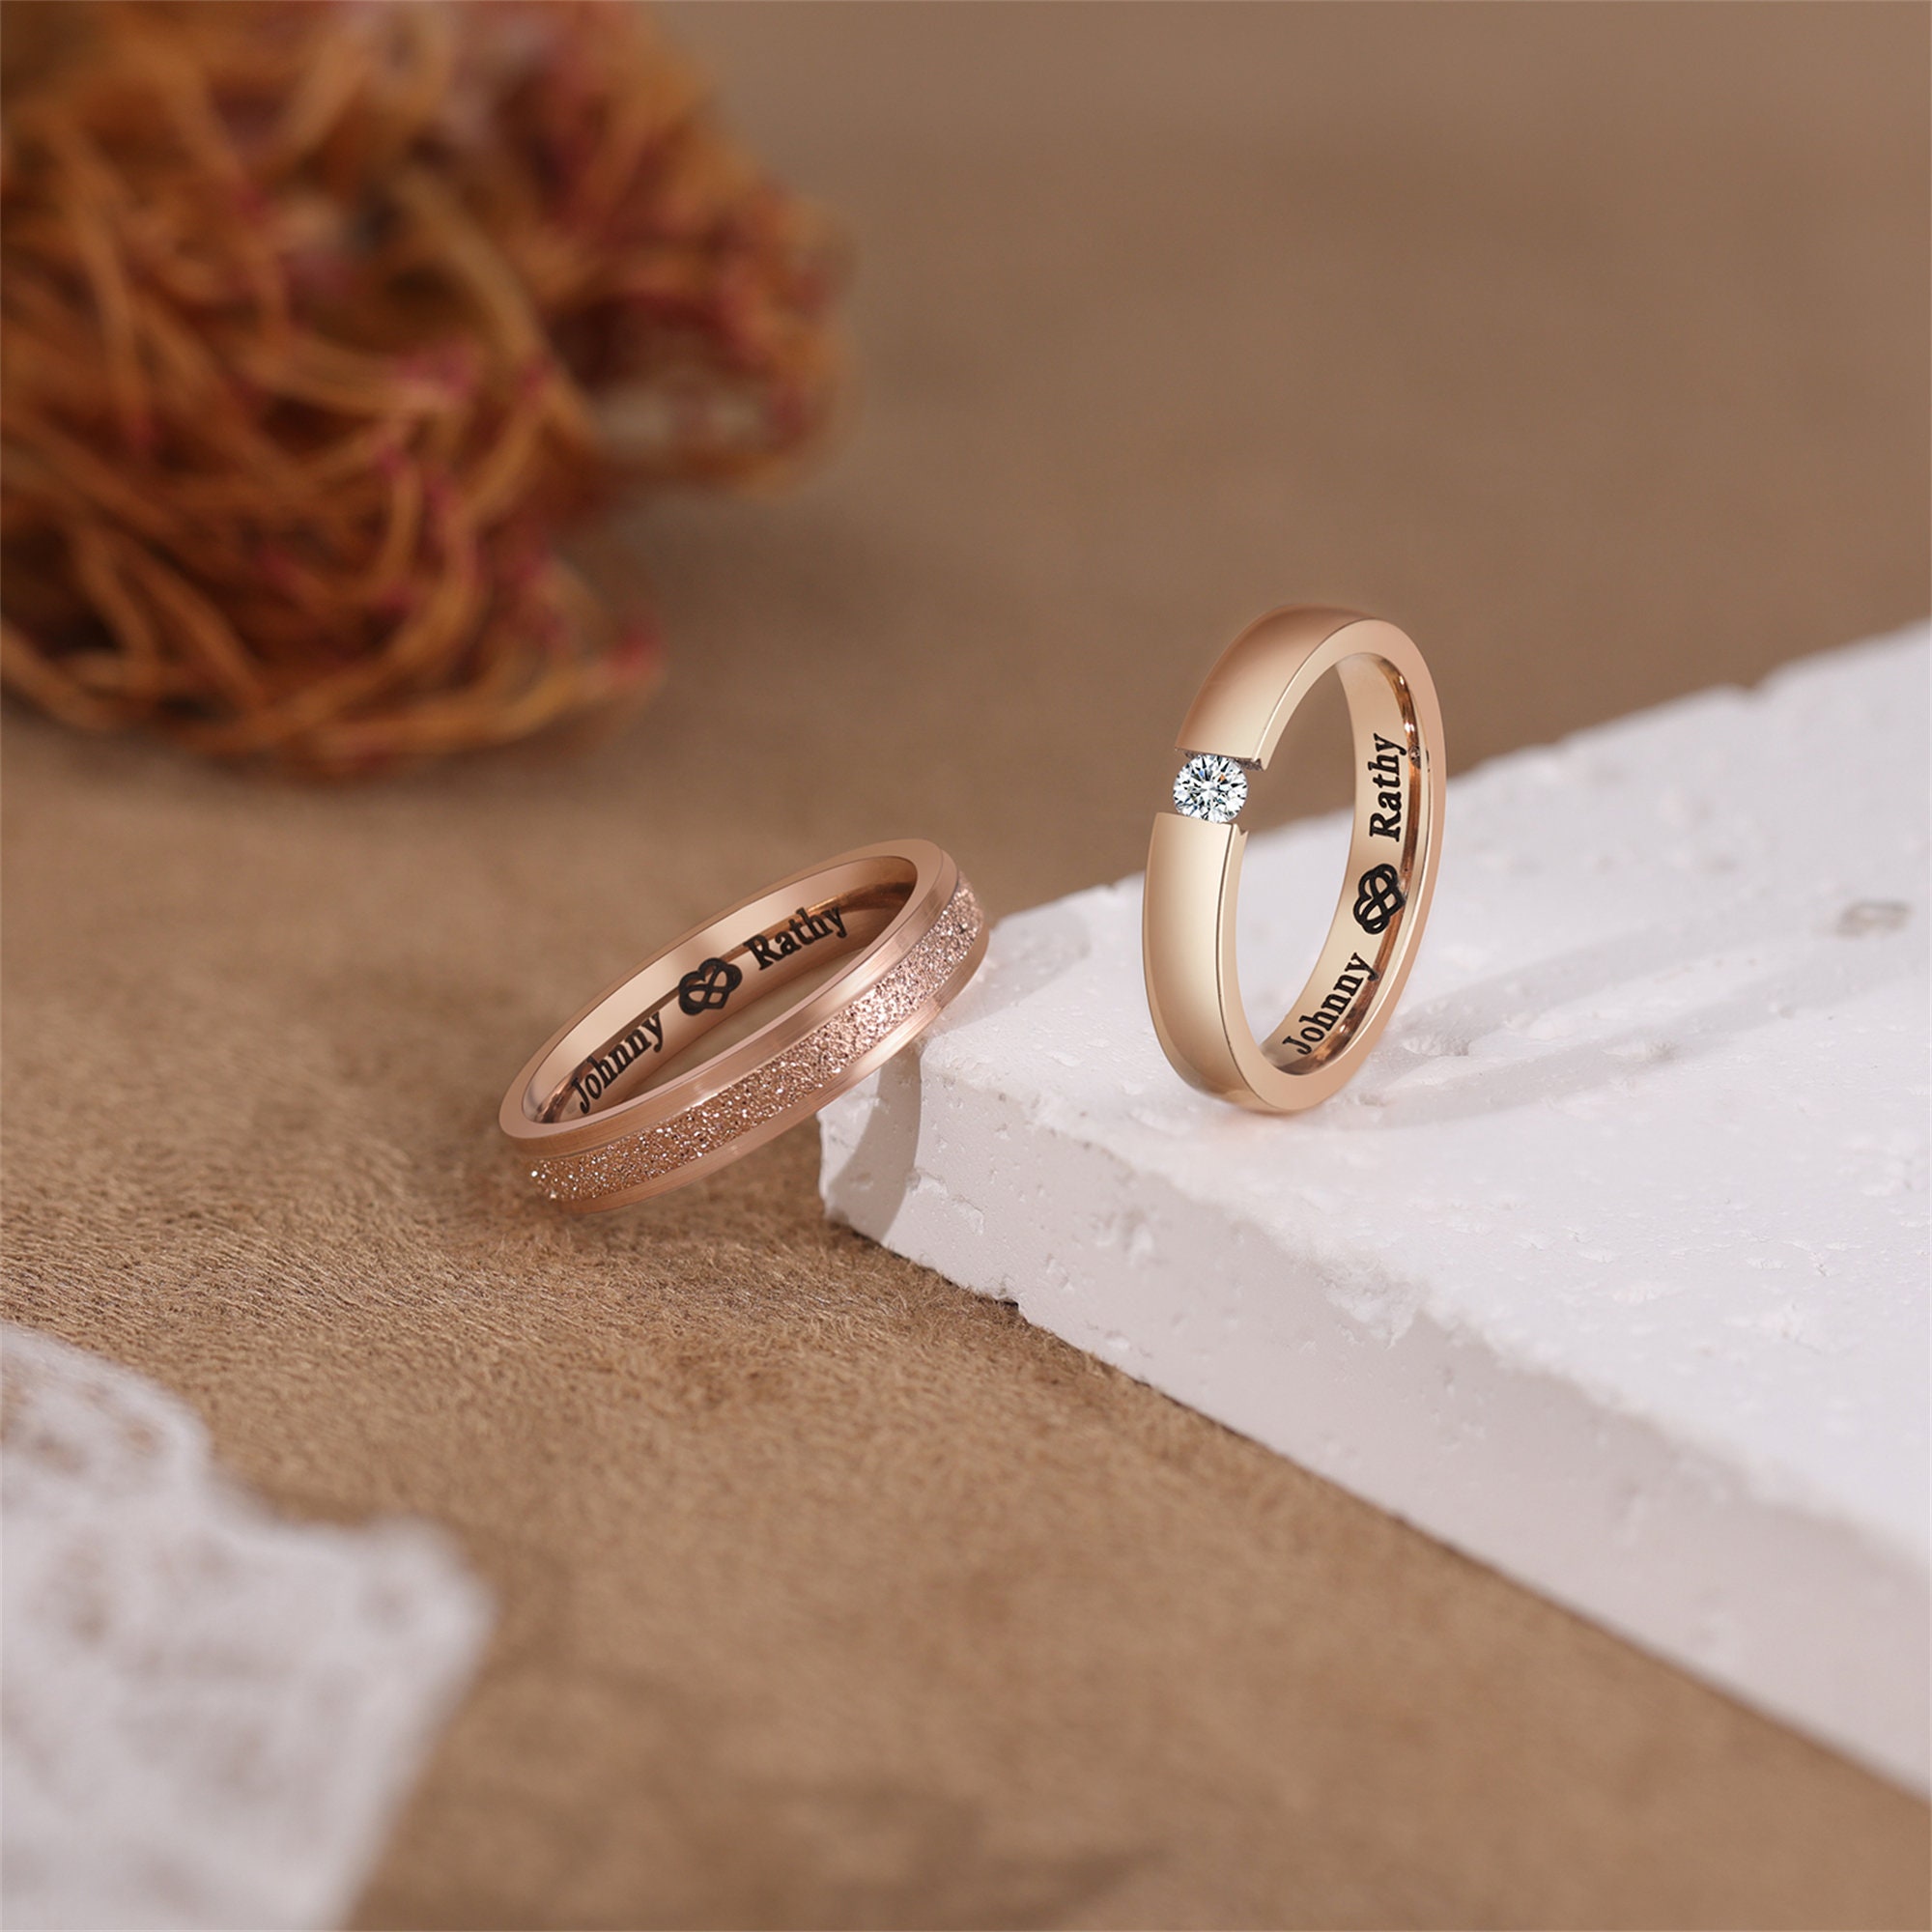 King and Queen Couple Rings His and Her Matching Rose Gold